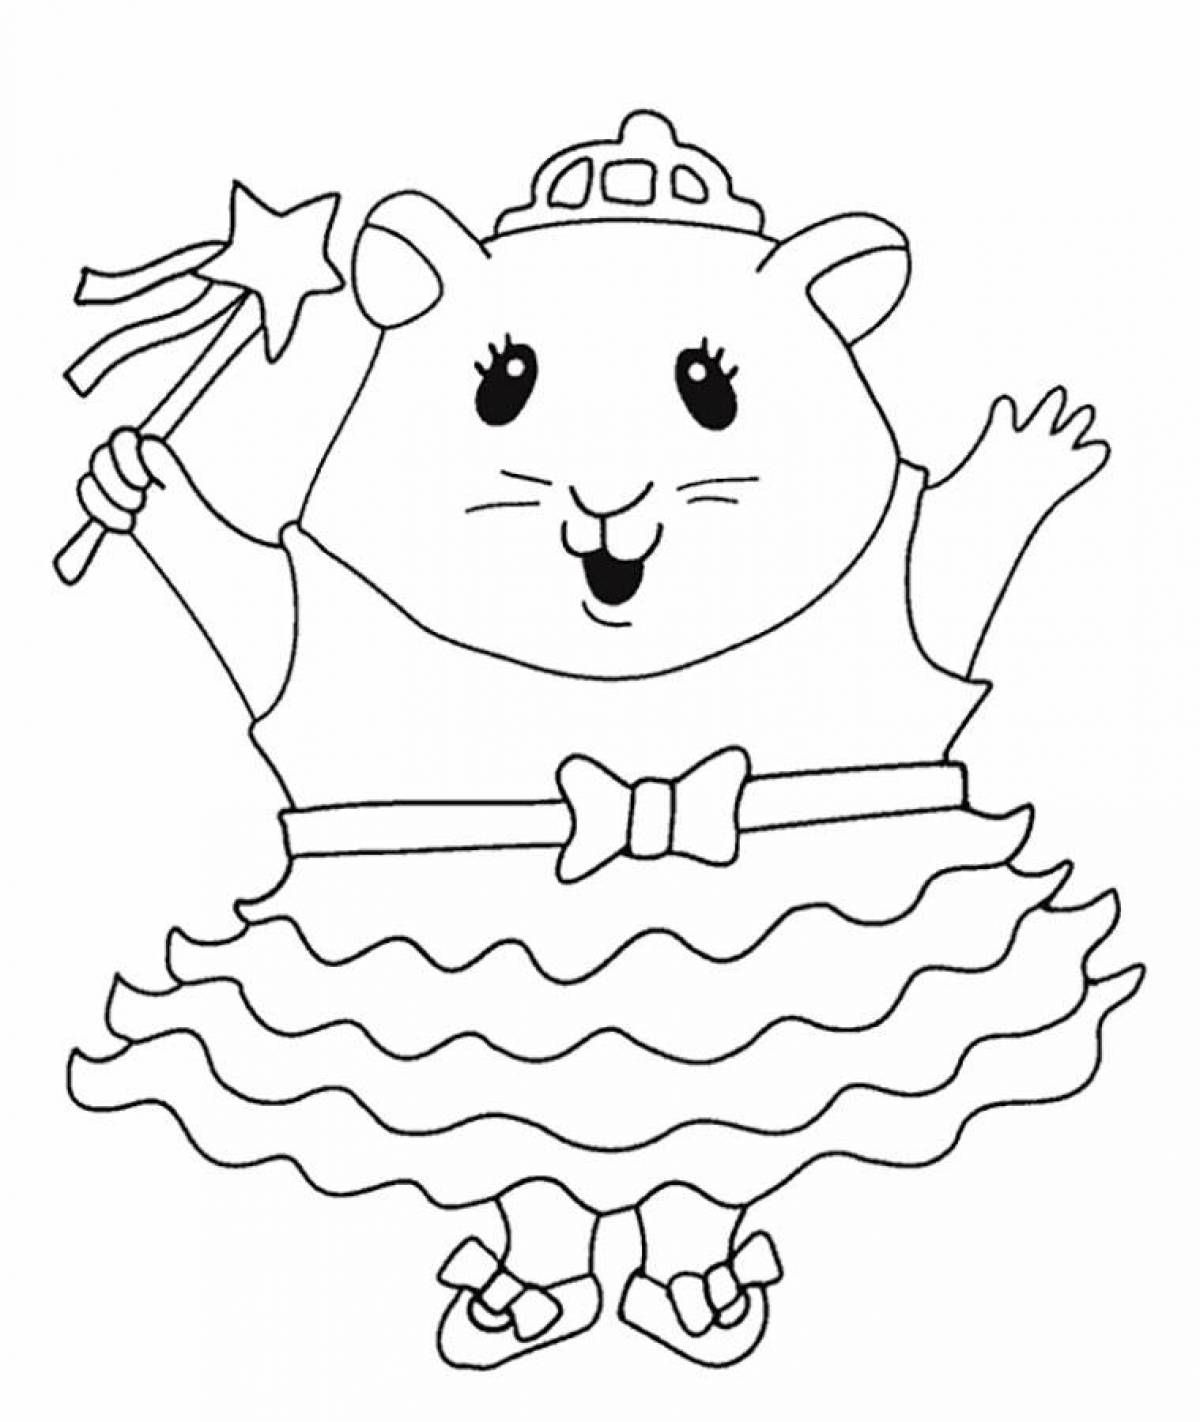 A wonderful hamster coloring book for kids